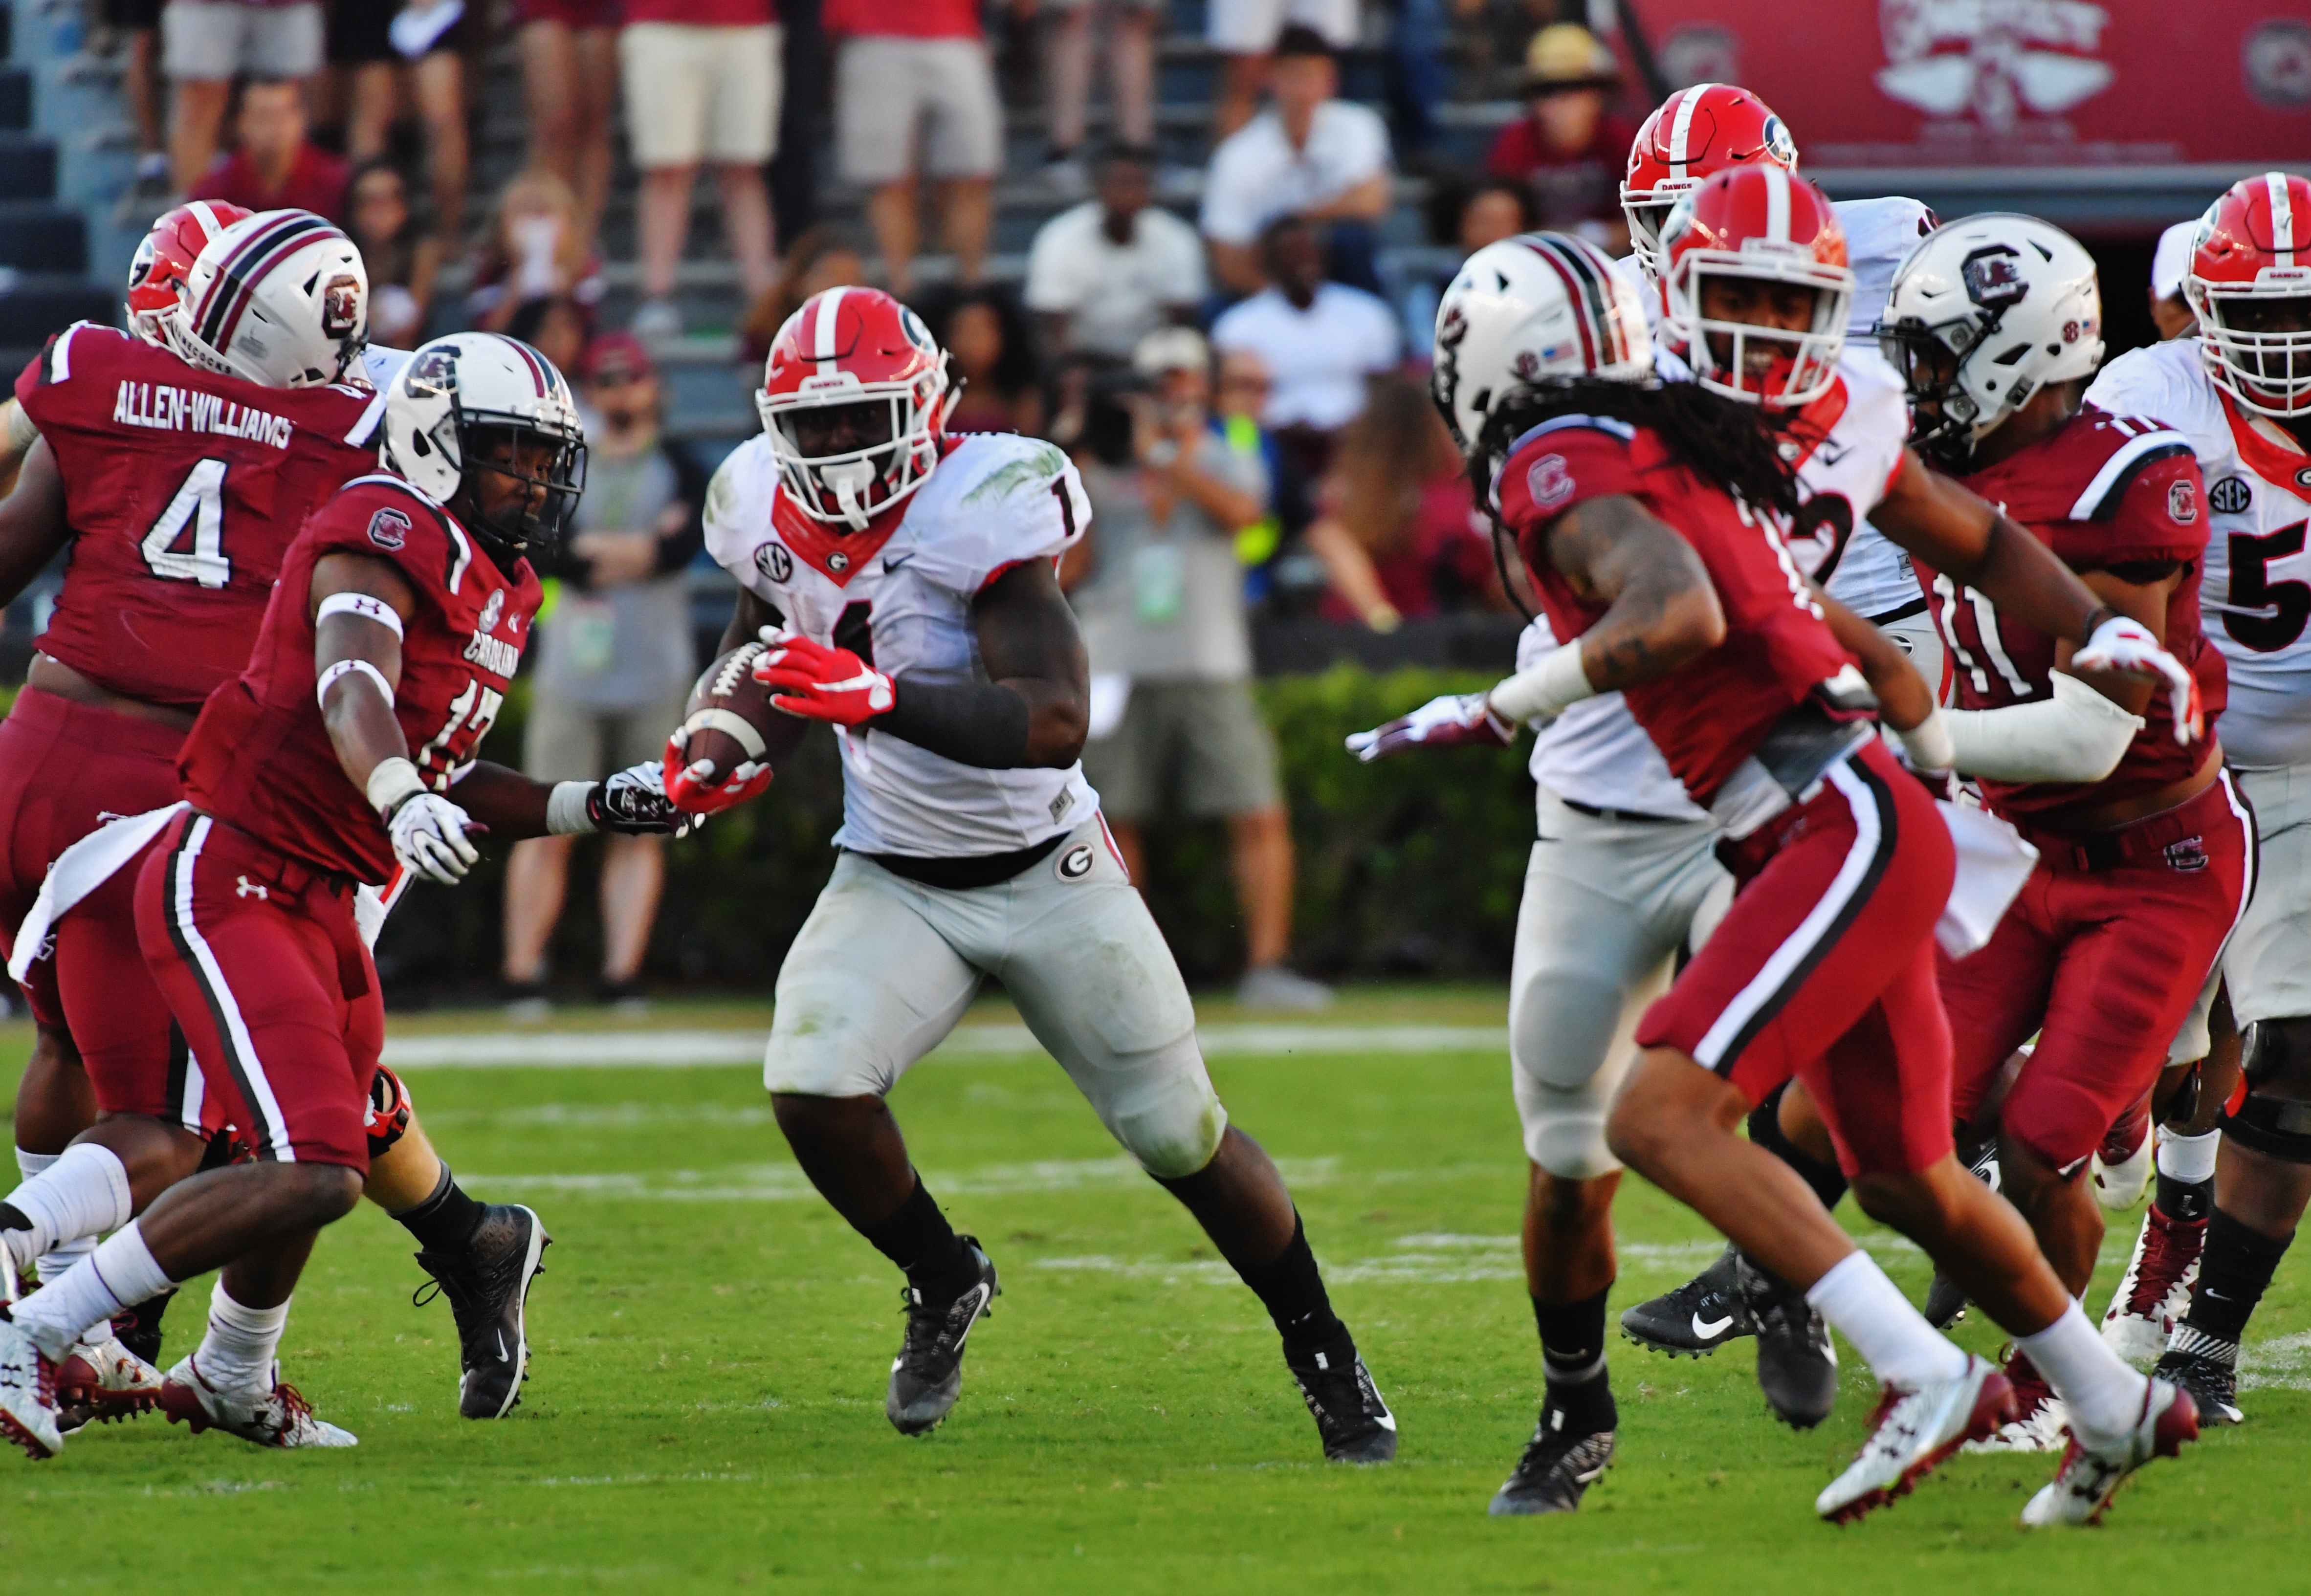 The Dawgs running game set the tone in the win at South Carolina (Photo by Al Ashe)